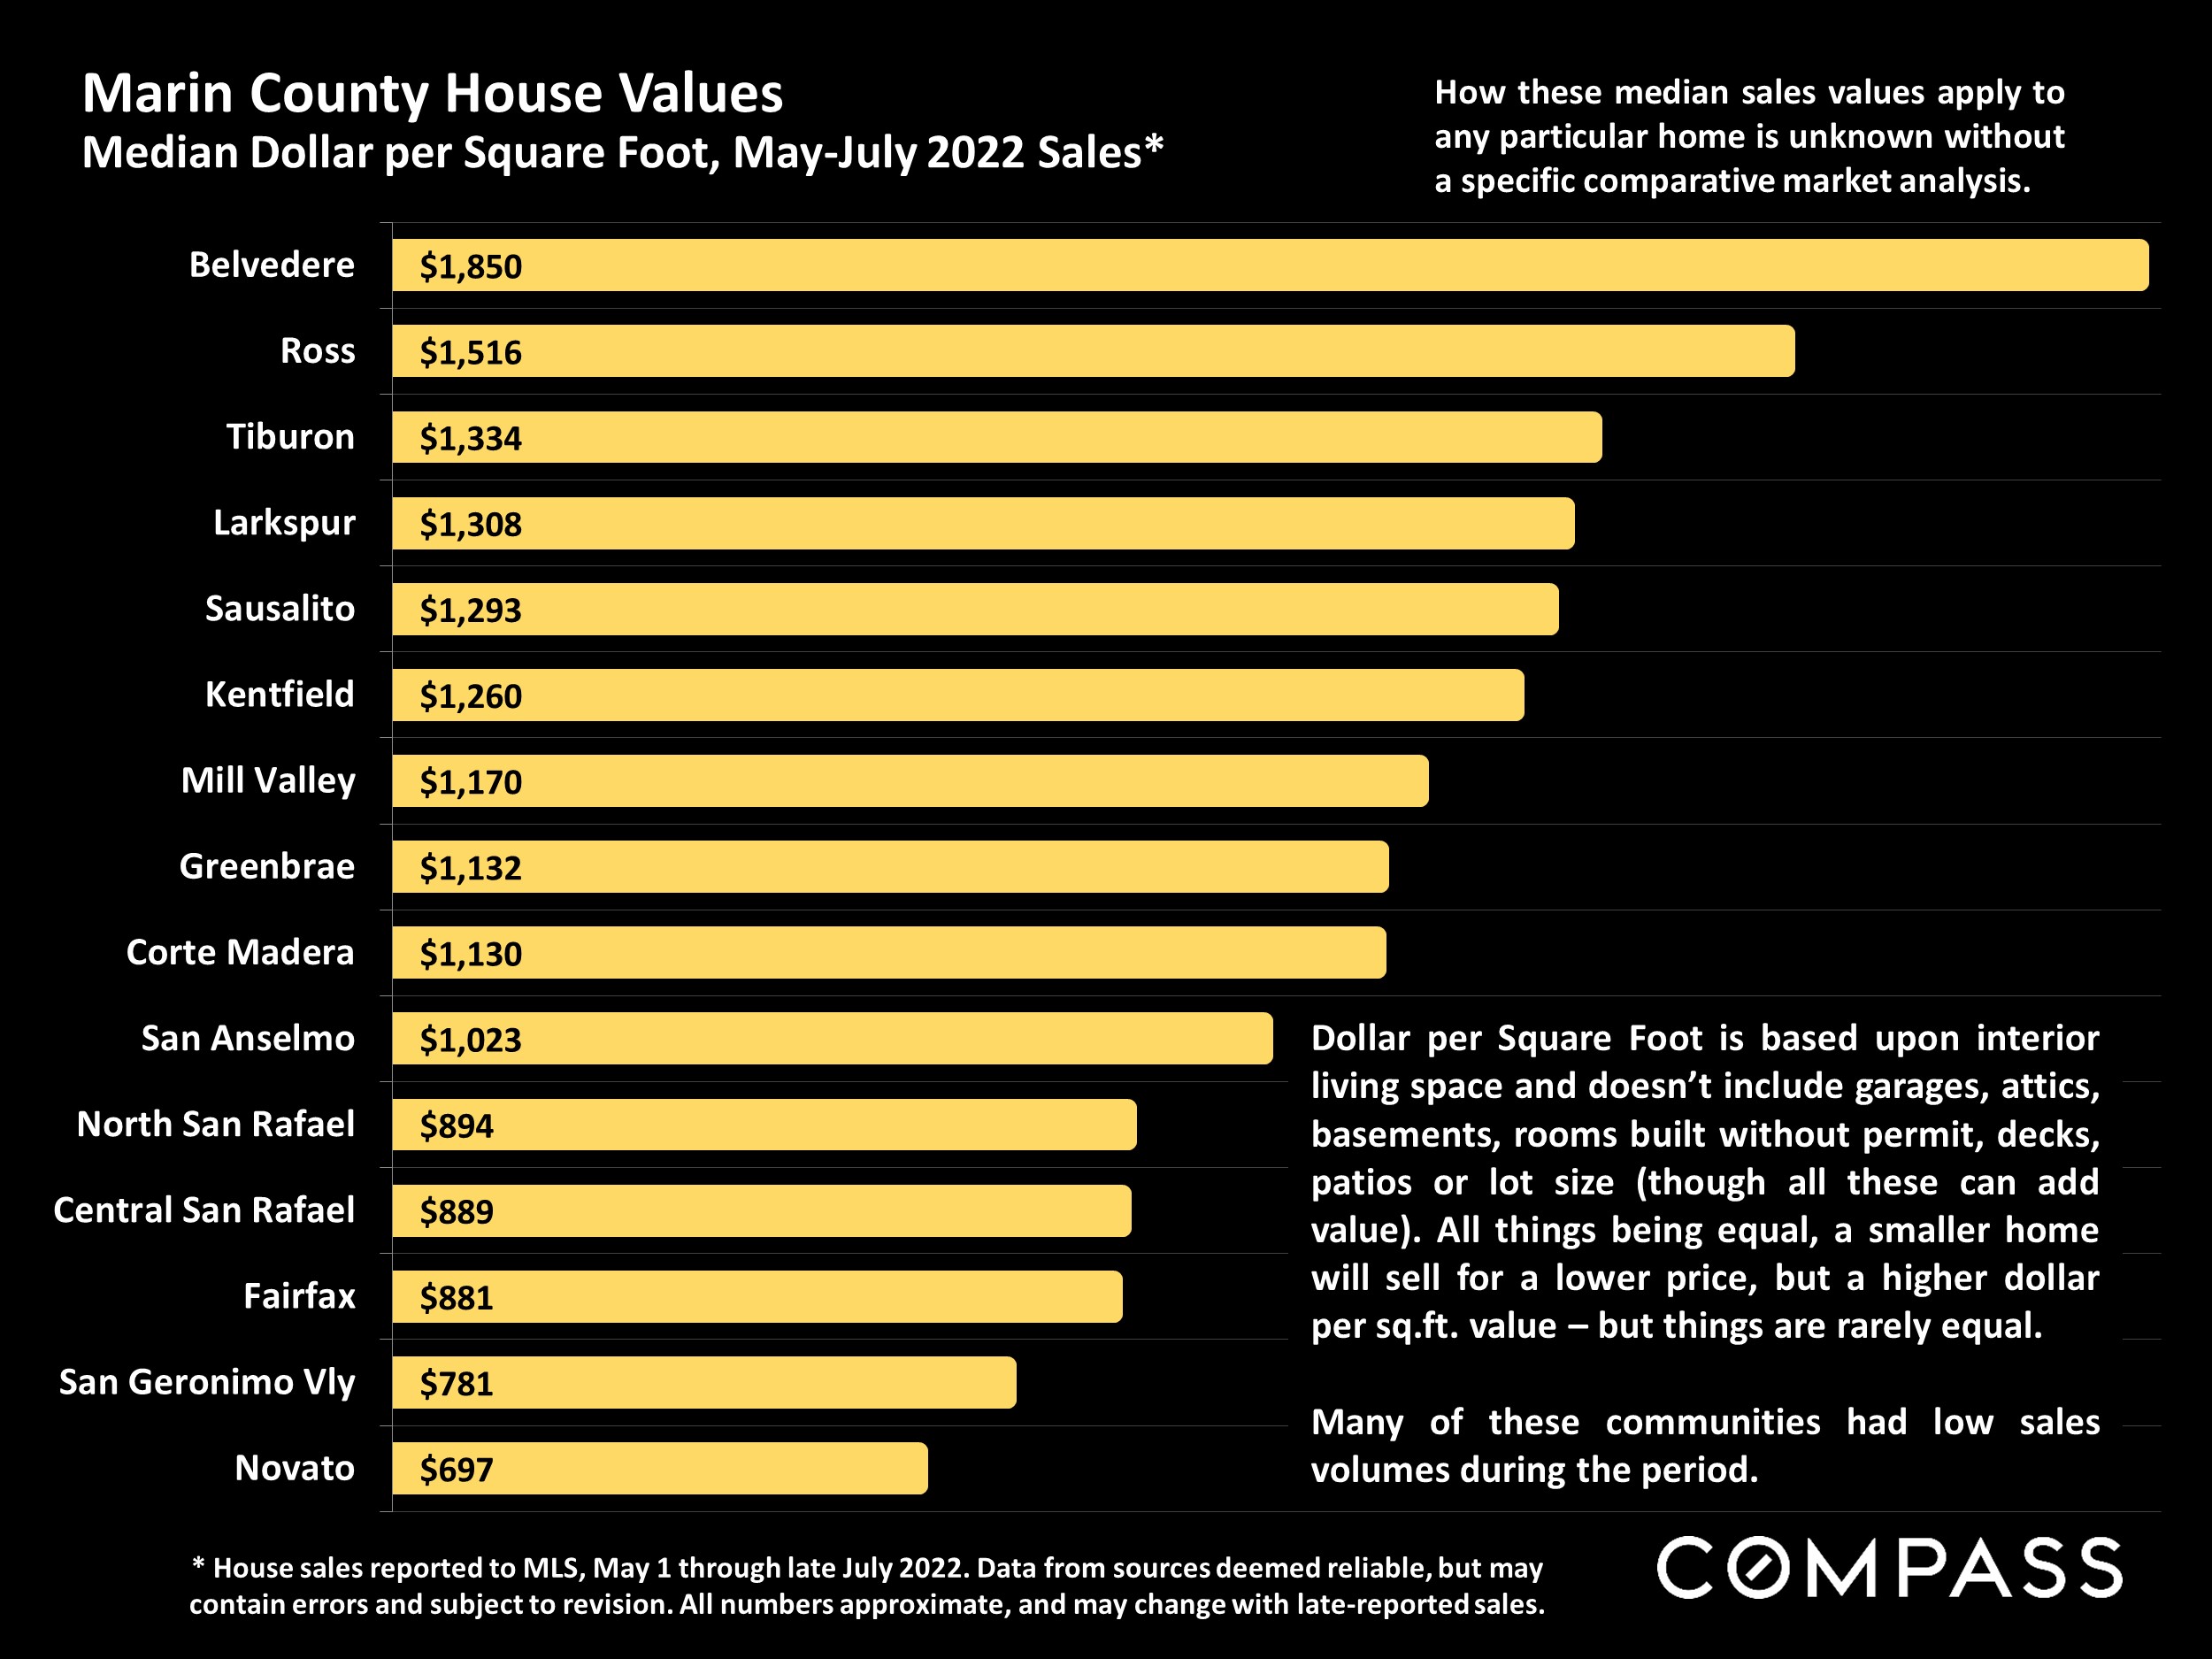 Marin County House Values Median Dollar per Square Foot